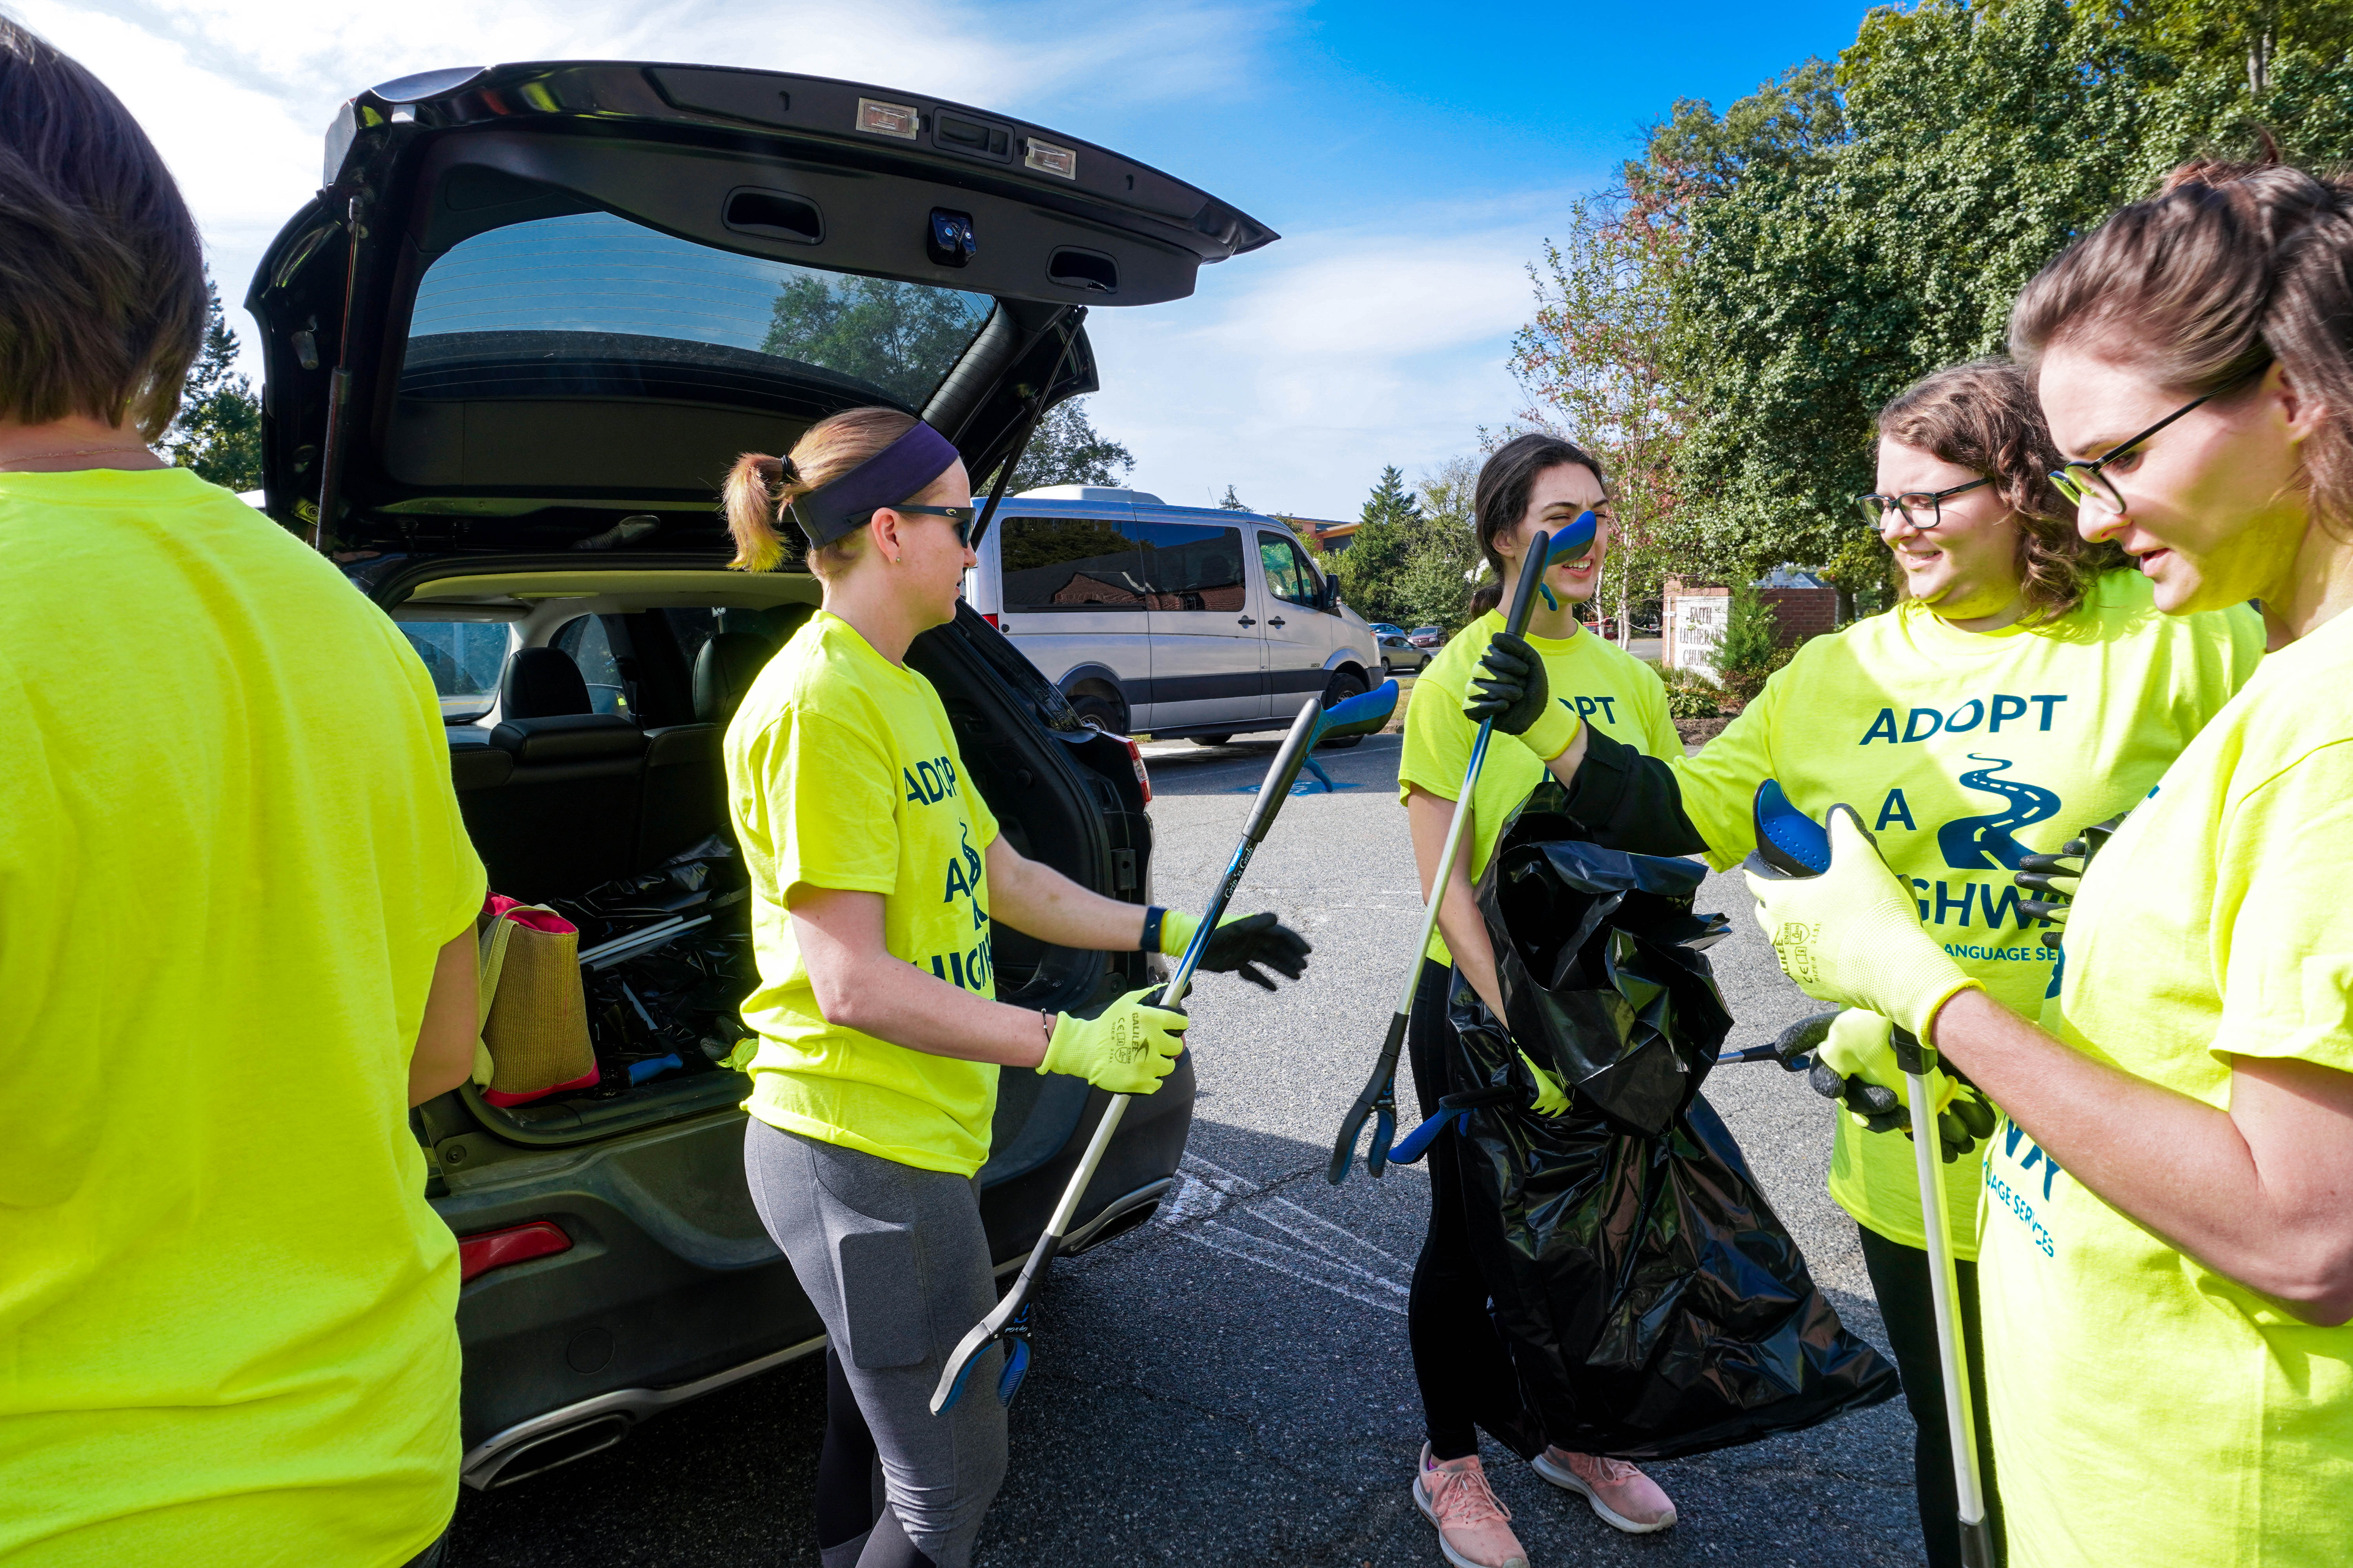 Diplomatic Language Services staff members prepare for their highway cleanup in the Washington DC metro area